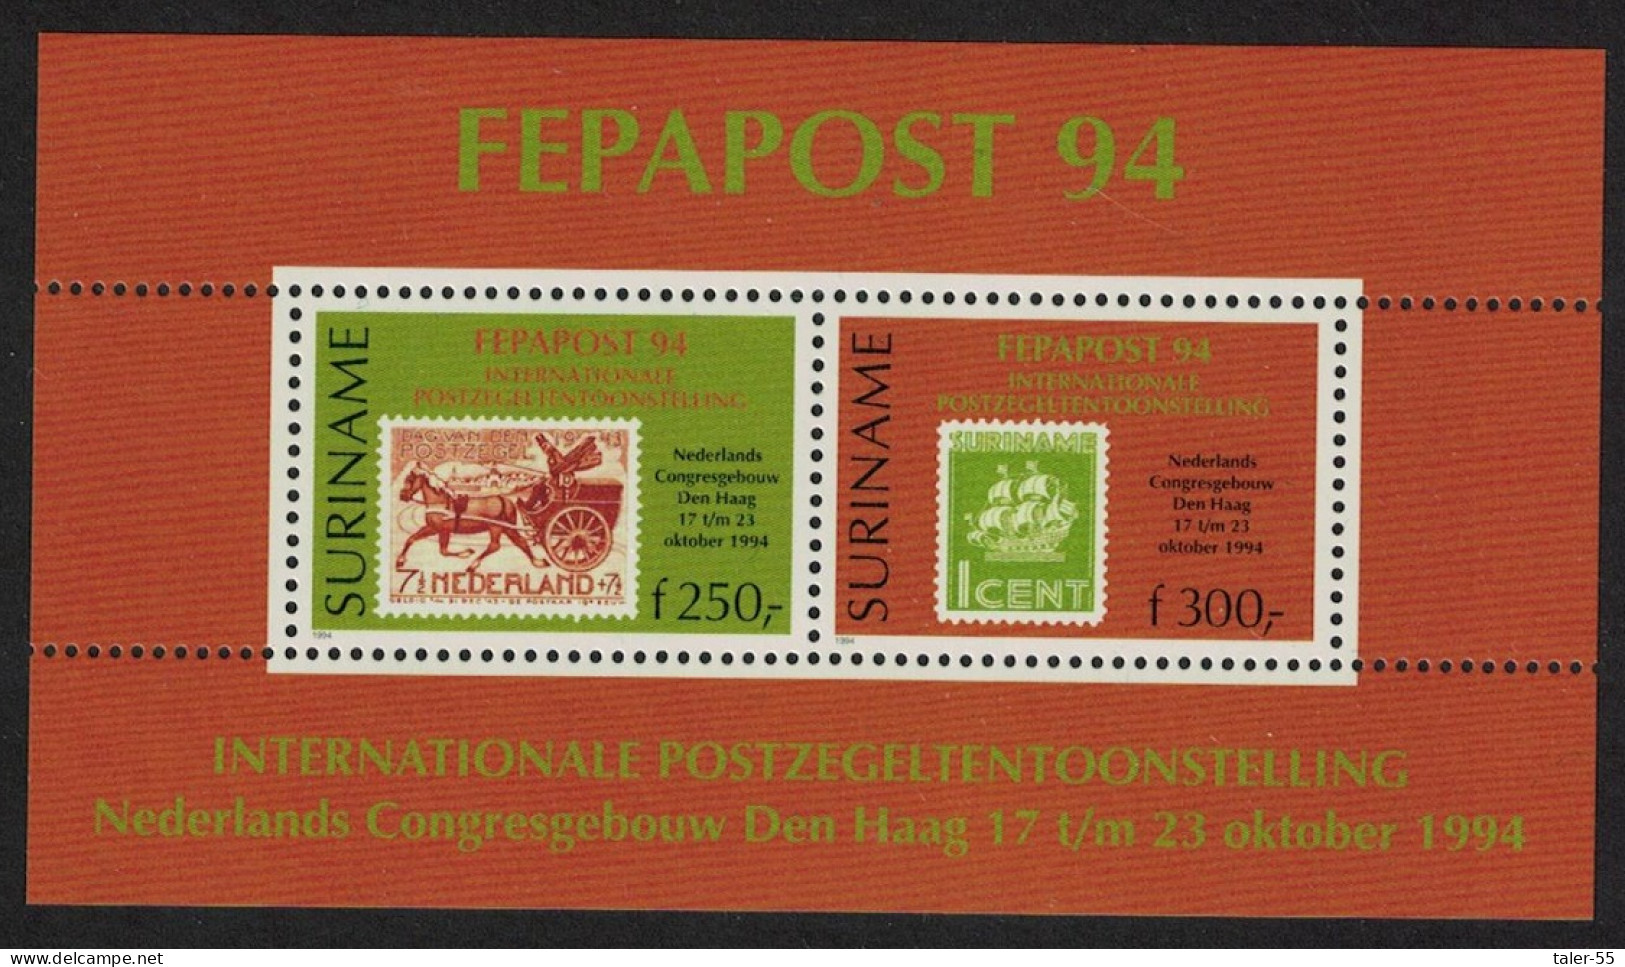 Suriname 'Fepapost 94' European Stamp Exhibition The Hague MS 1994 MNH SG#MS1609 - Suriname